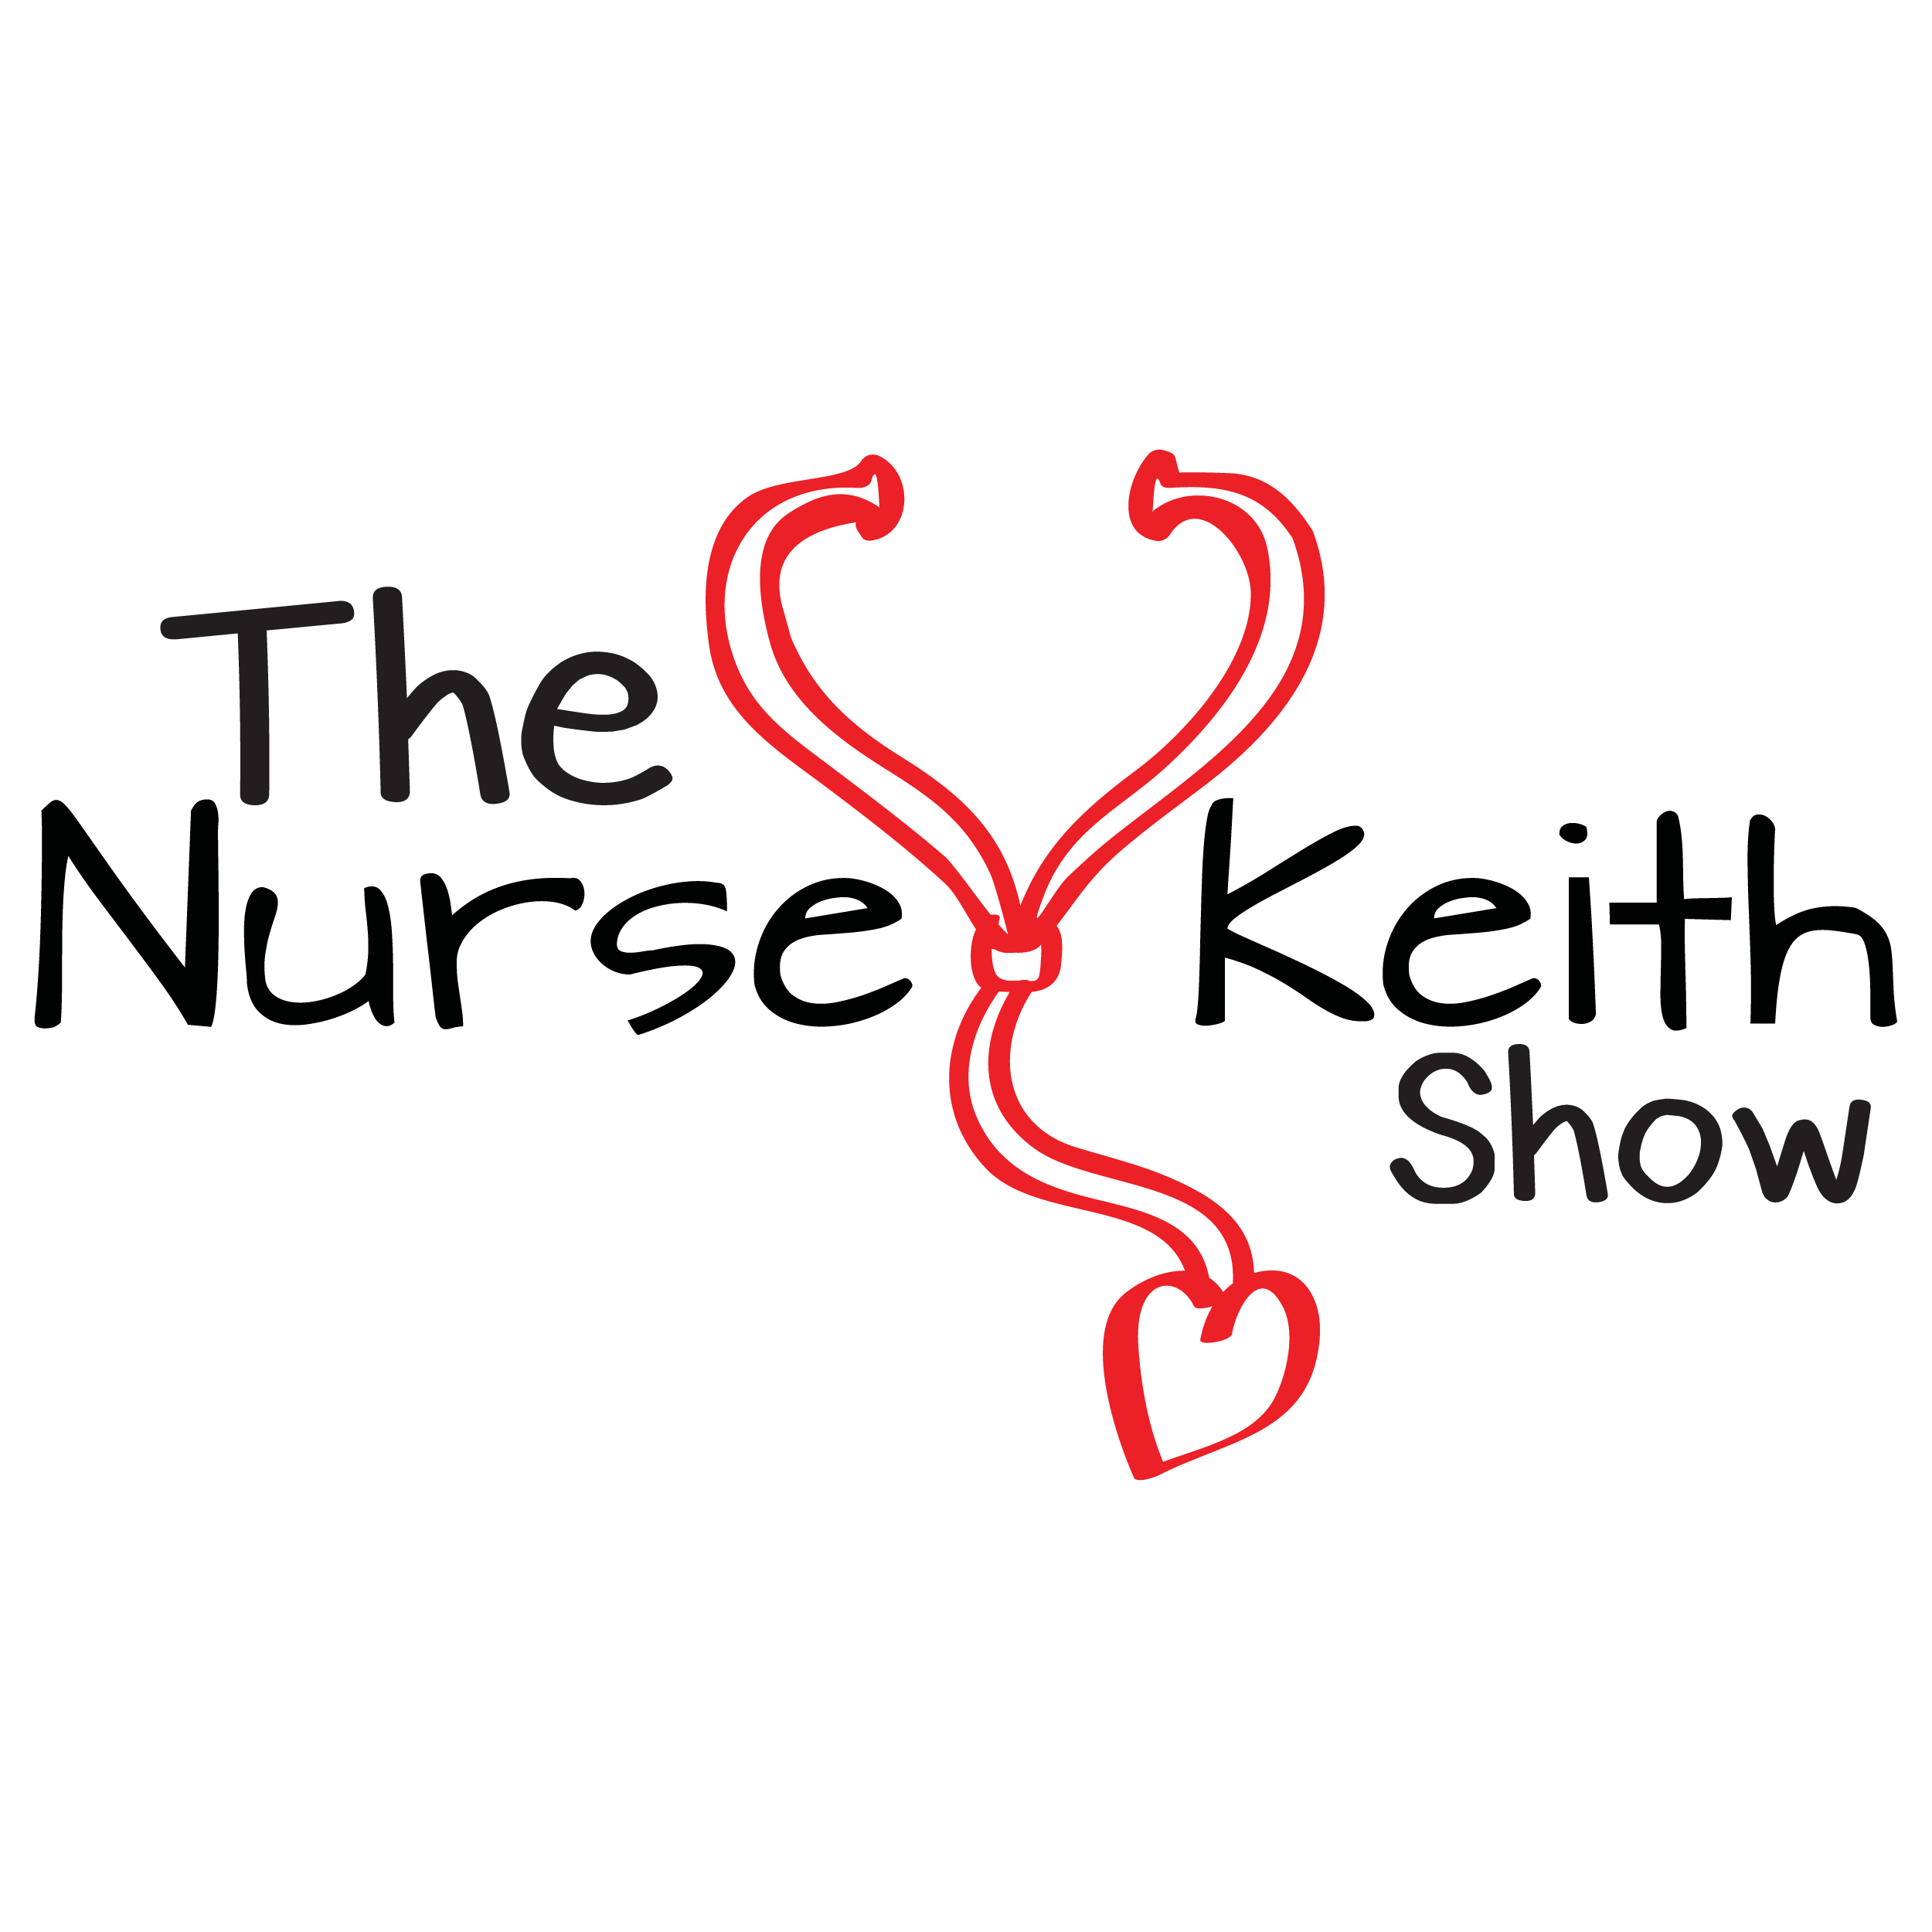 The Nurse Keith Show: Empowering Nurses’ Net Worth Through Knowledge and Wealth-Building